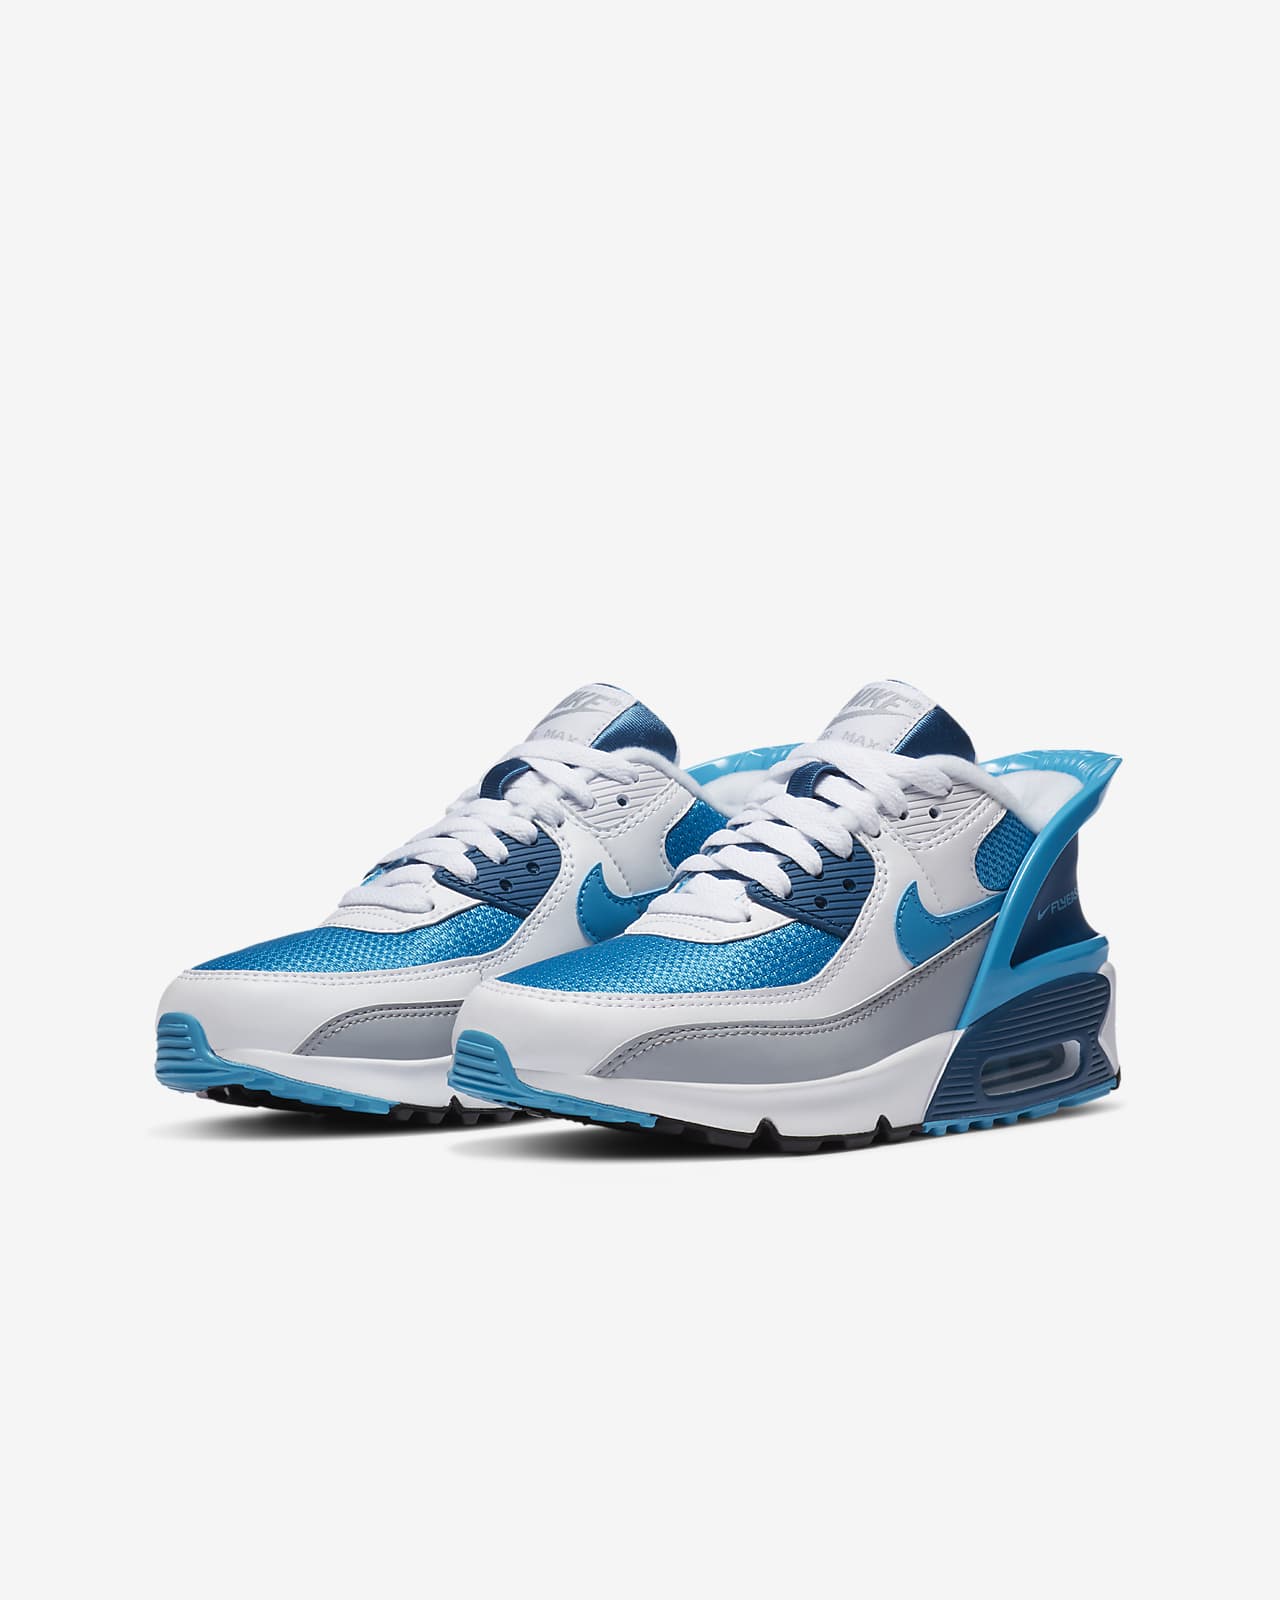 nike air max 90 flyease release date